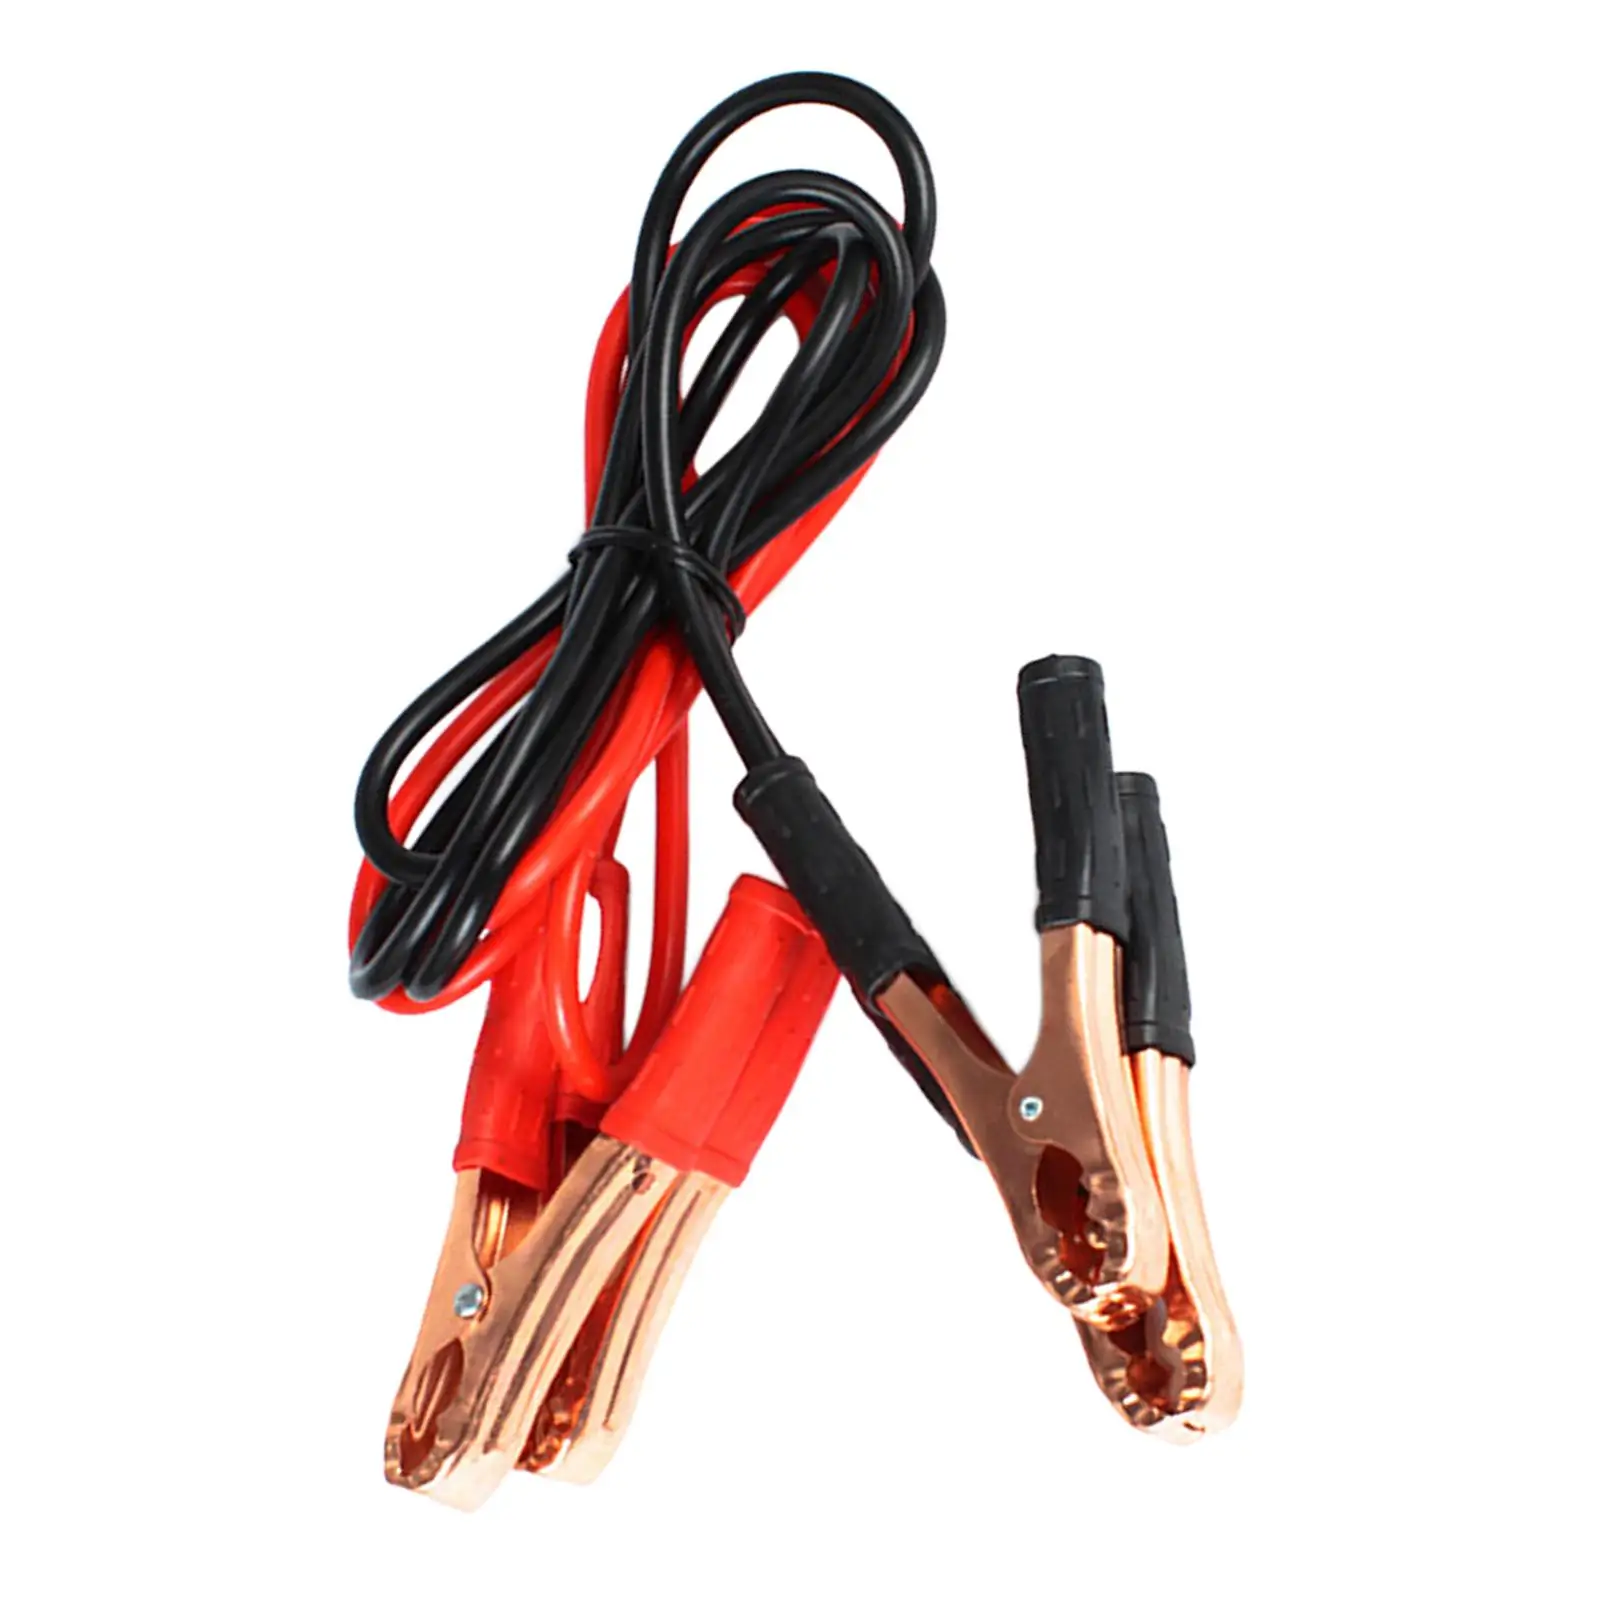 Jumper Cable Heavy Duty Jump Starting Booster Cable for Car SUV